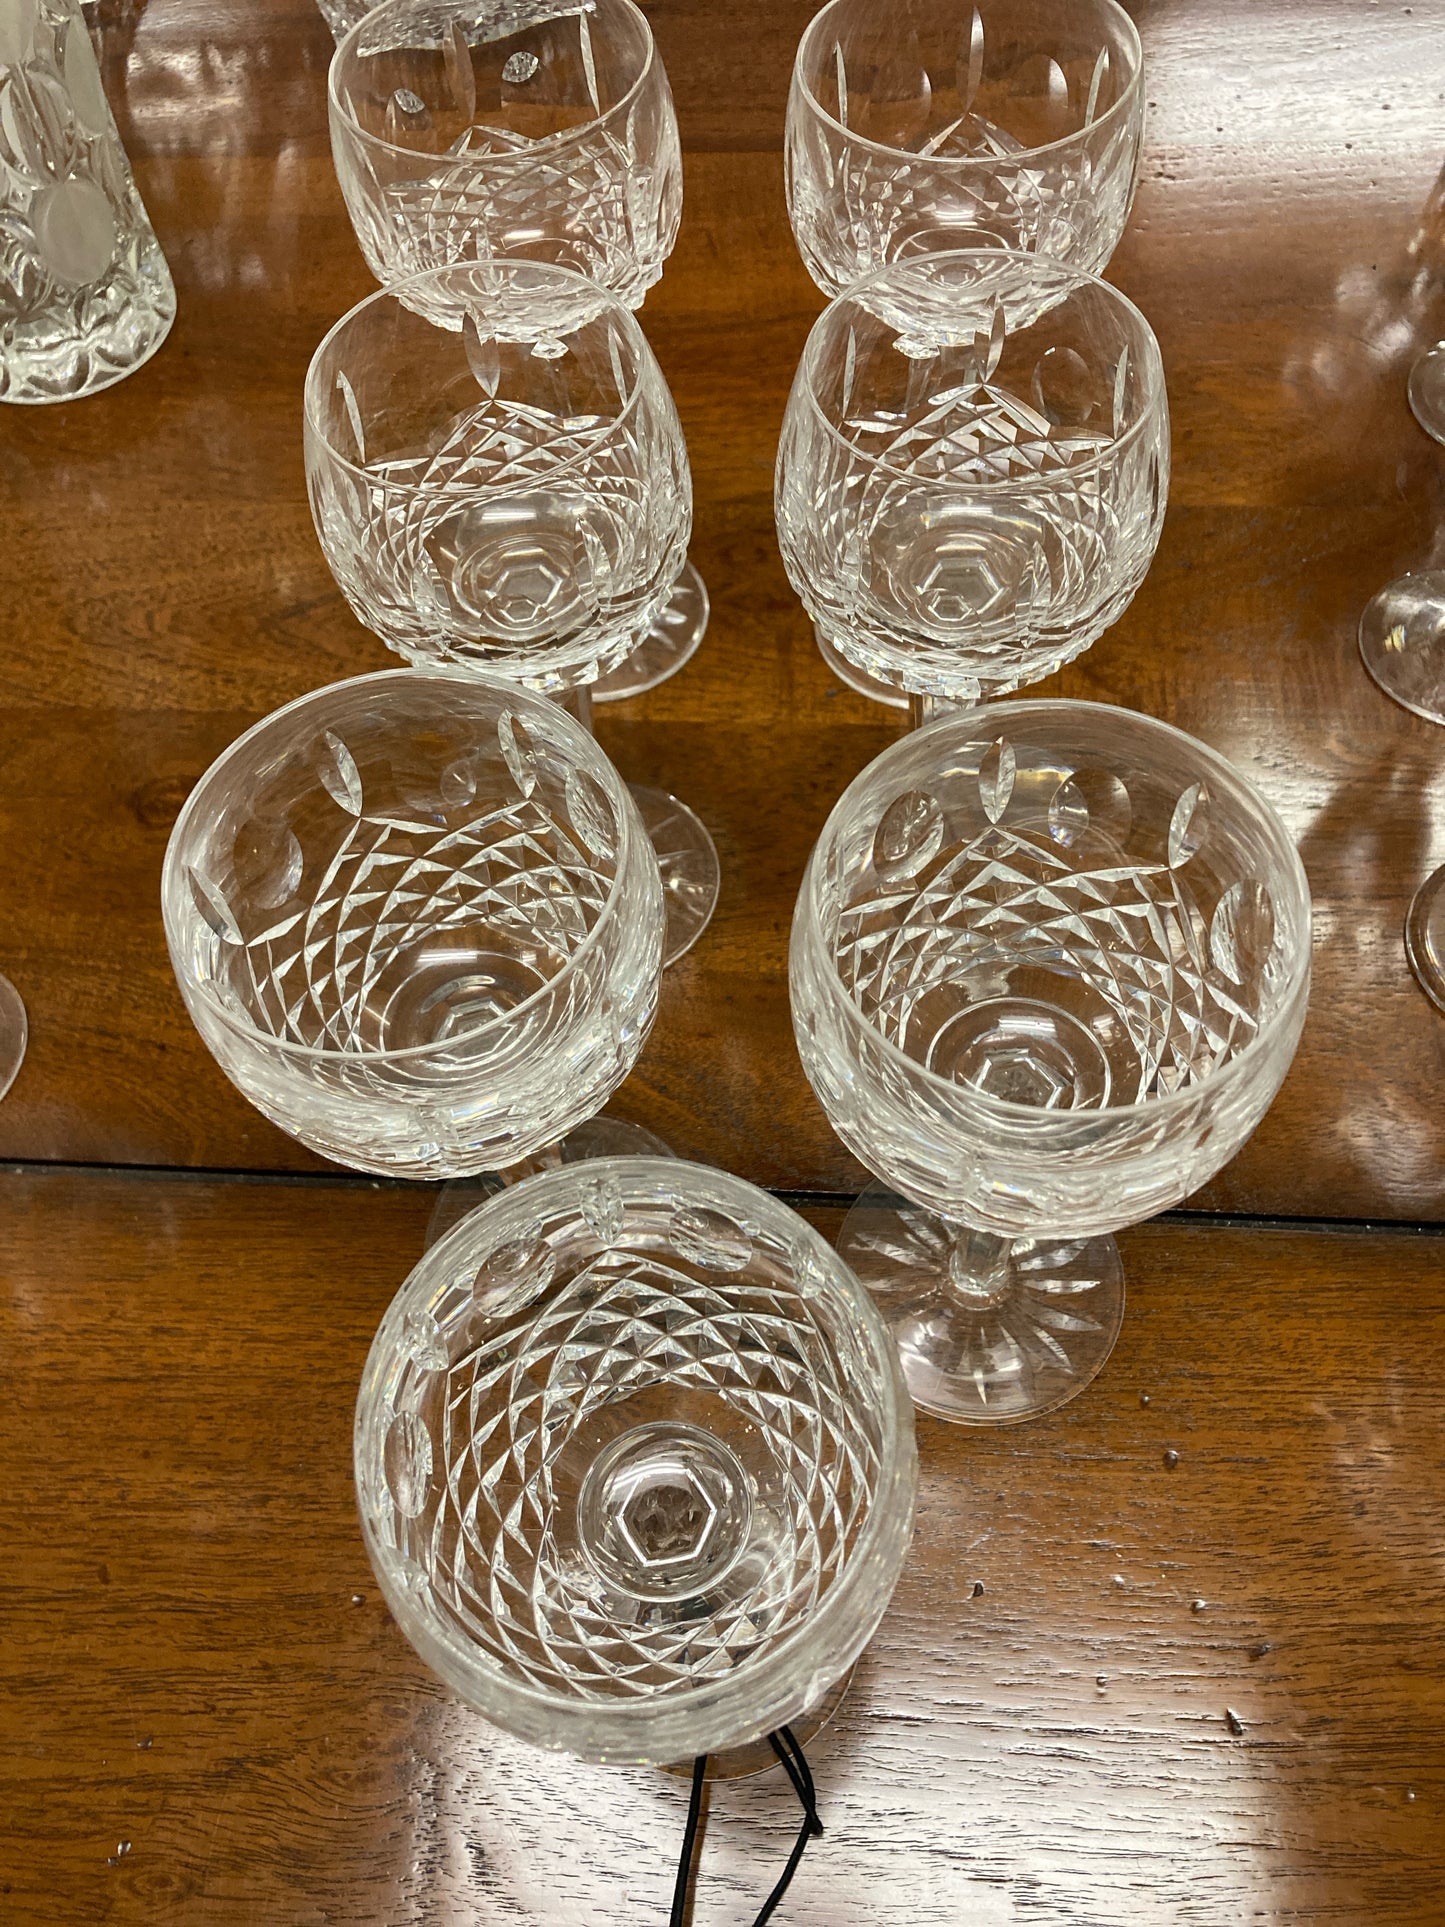 SET of 7 Waterford "Lismore" Wine Glasses